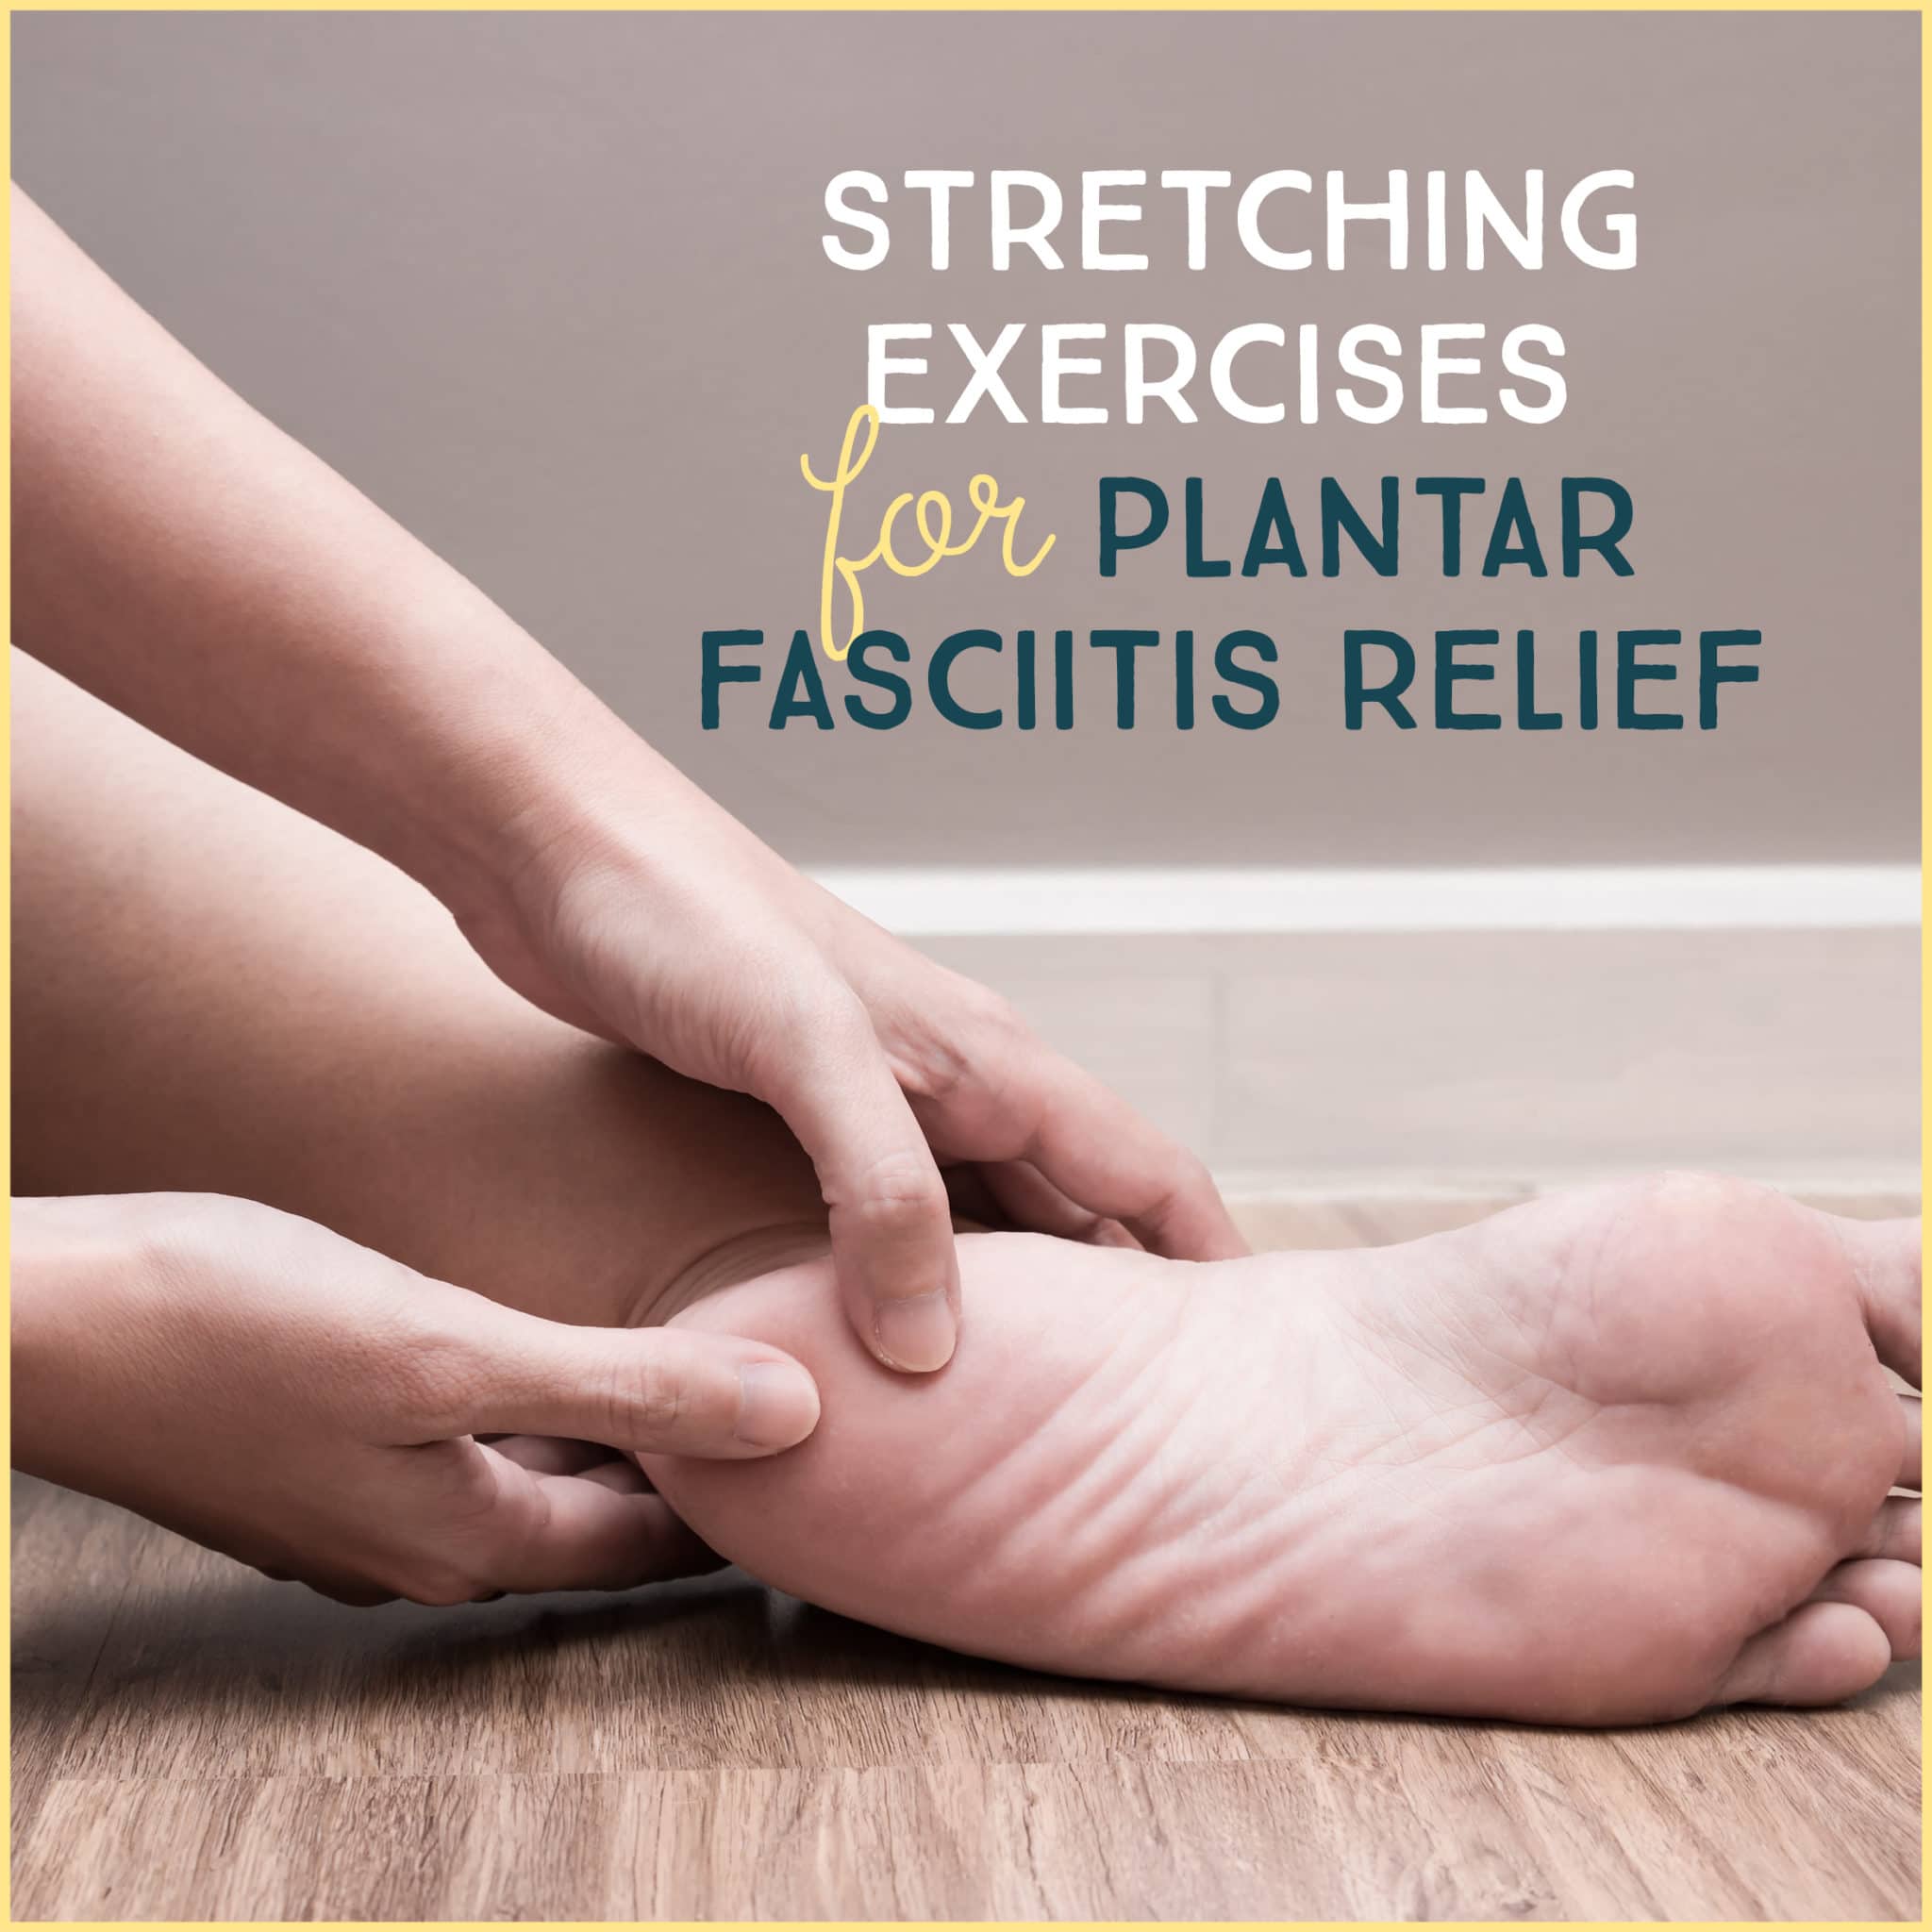 Stretching Exercises For Plantar Fasciitis Relief - Get Healthy U